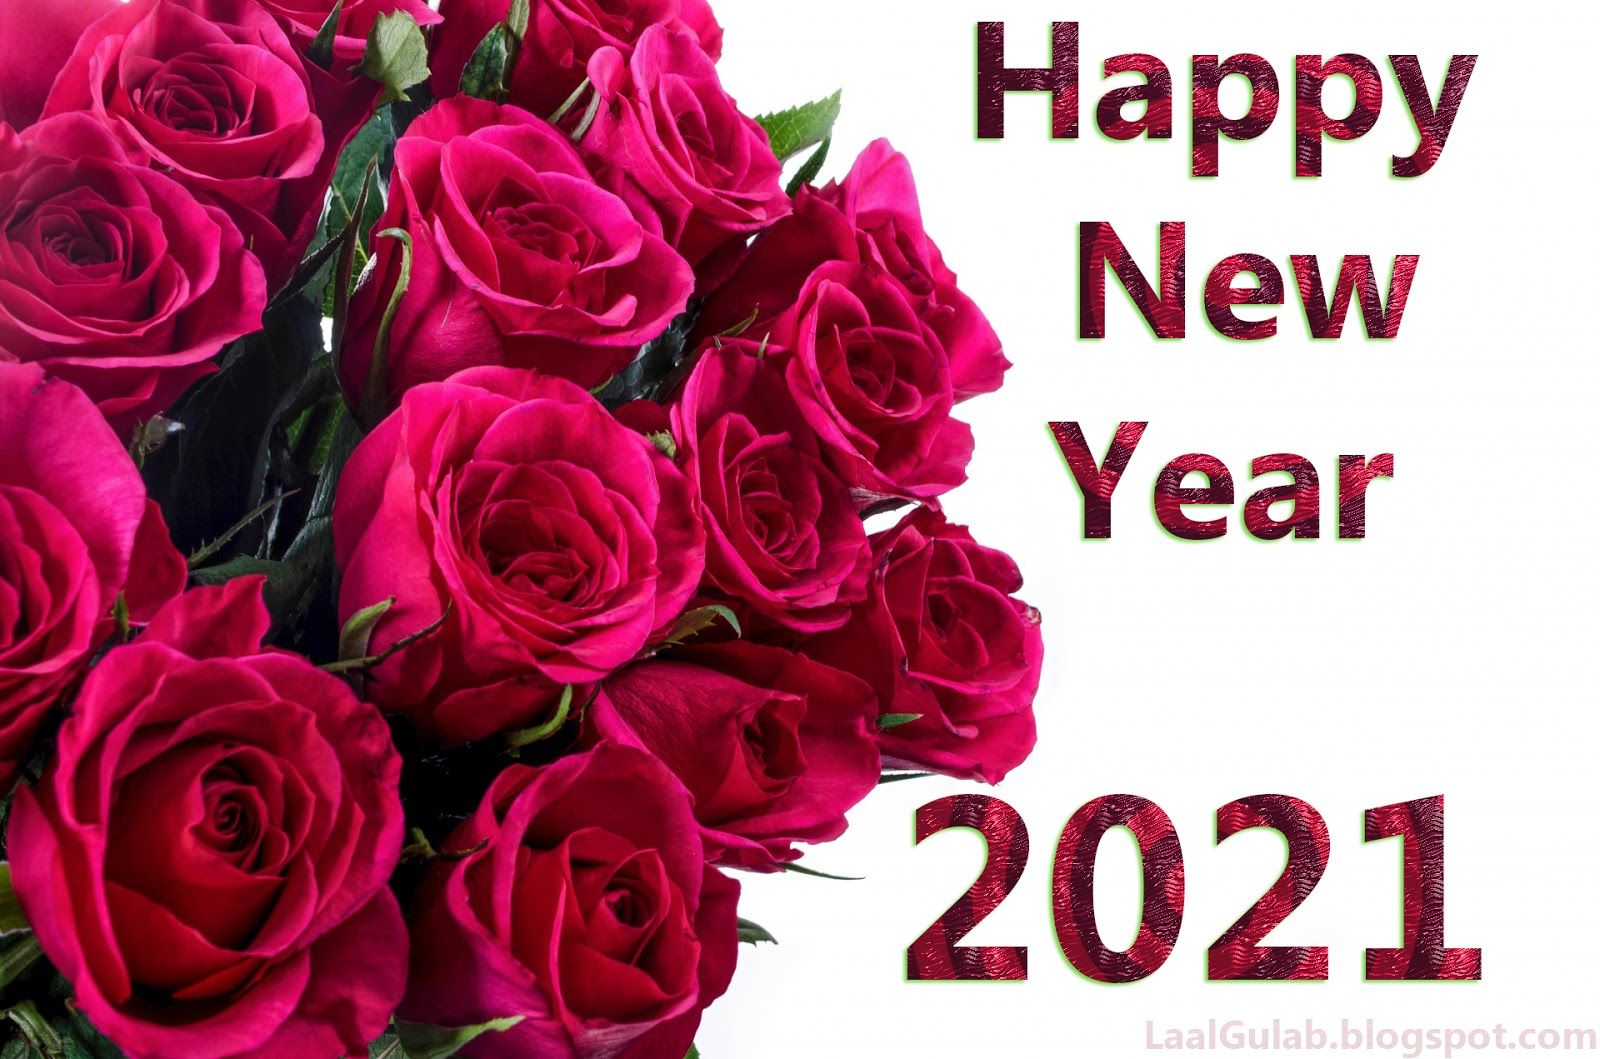 Happy New Year 2021 Wallpapers HD Download Free